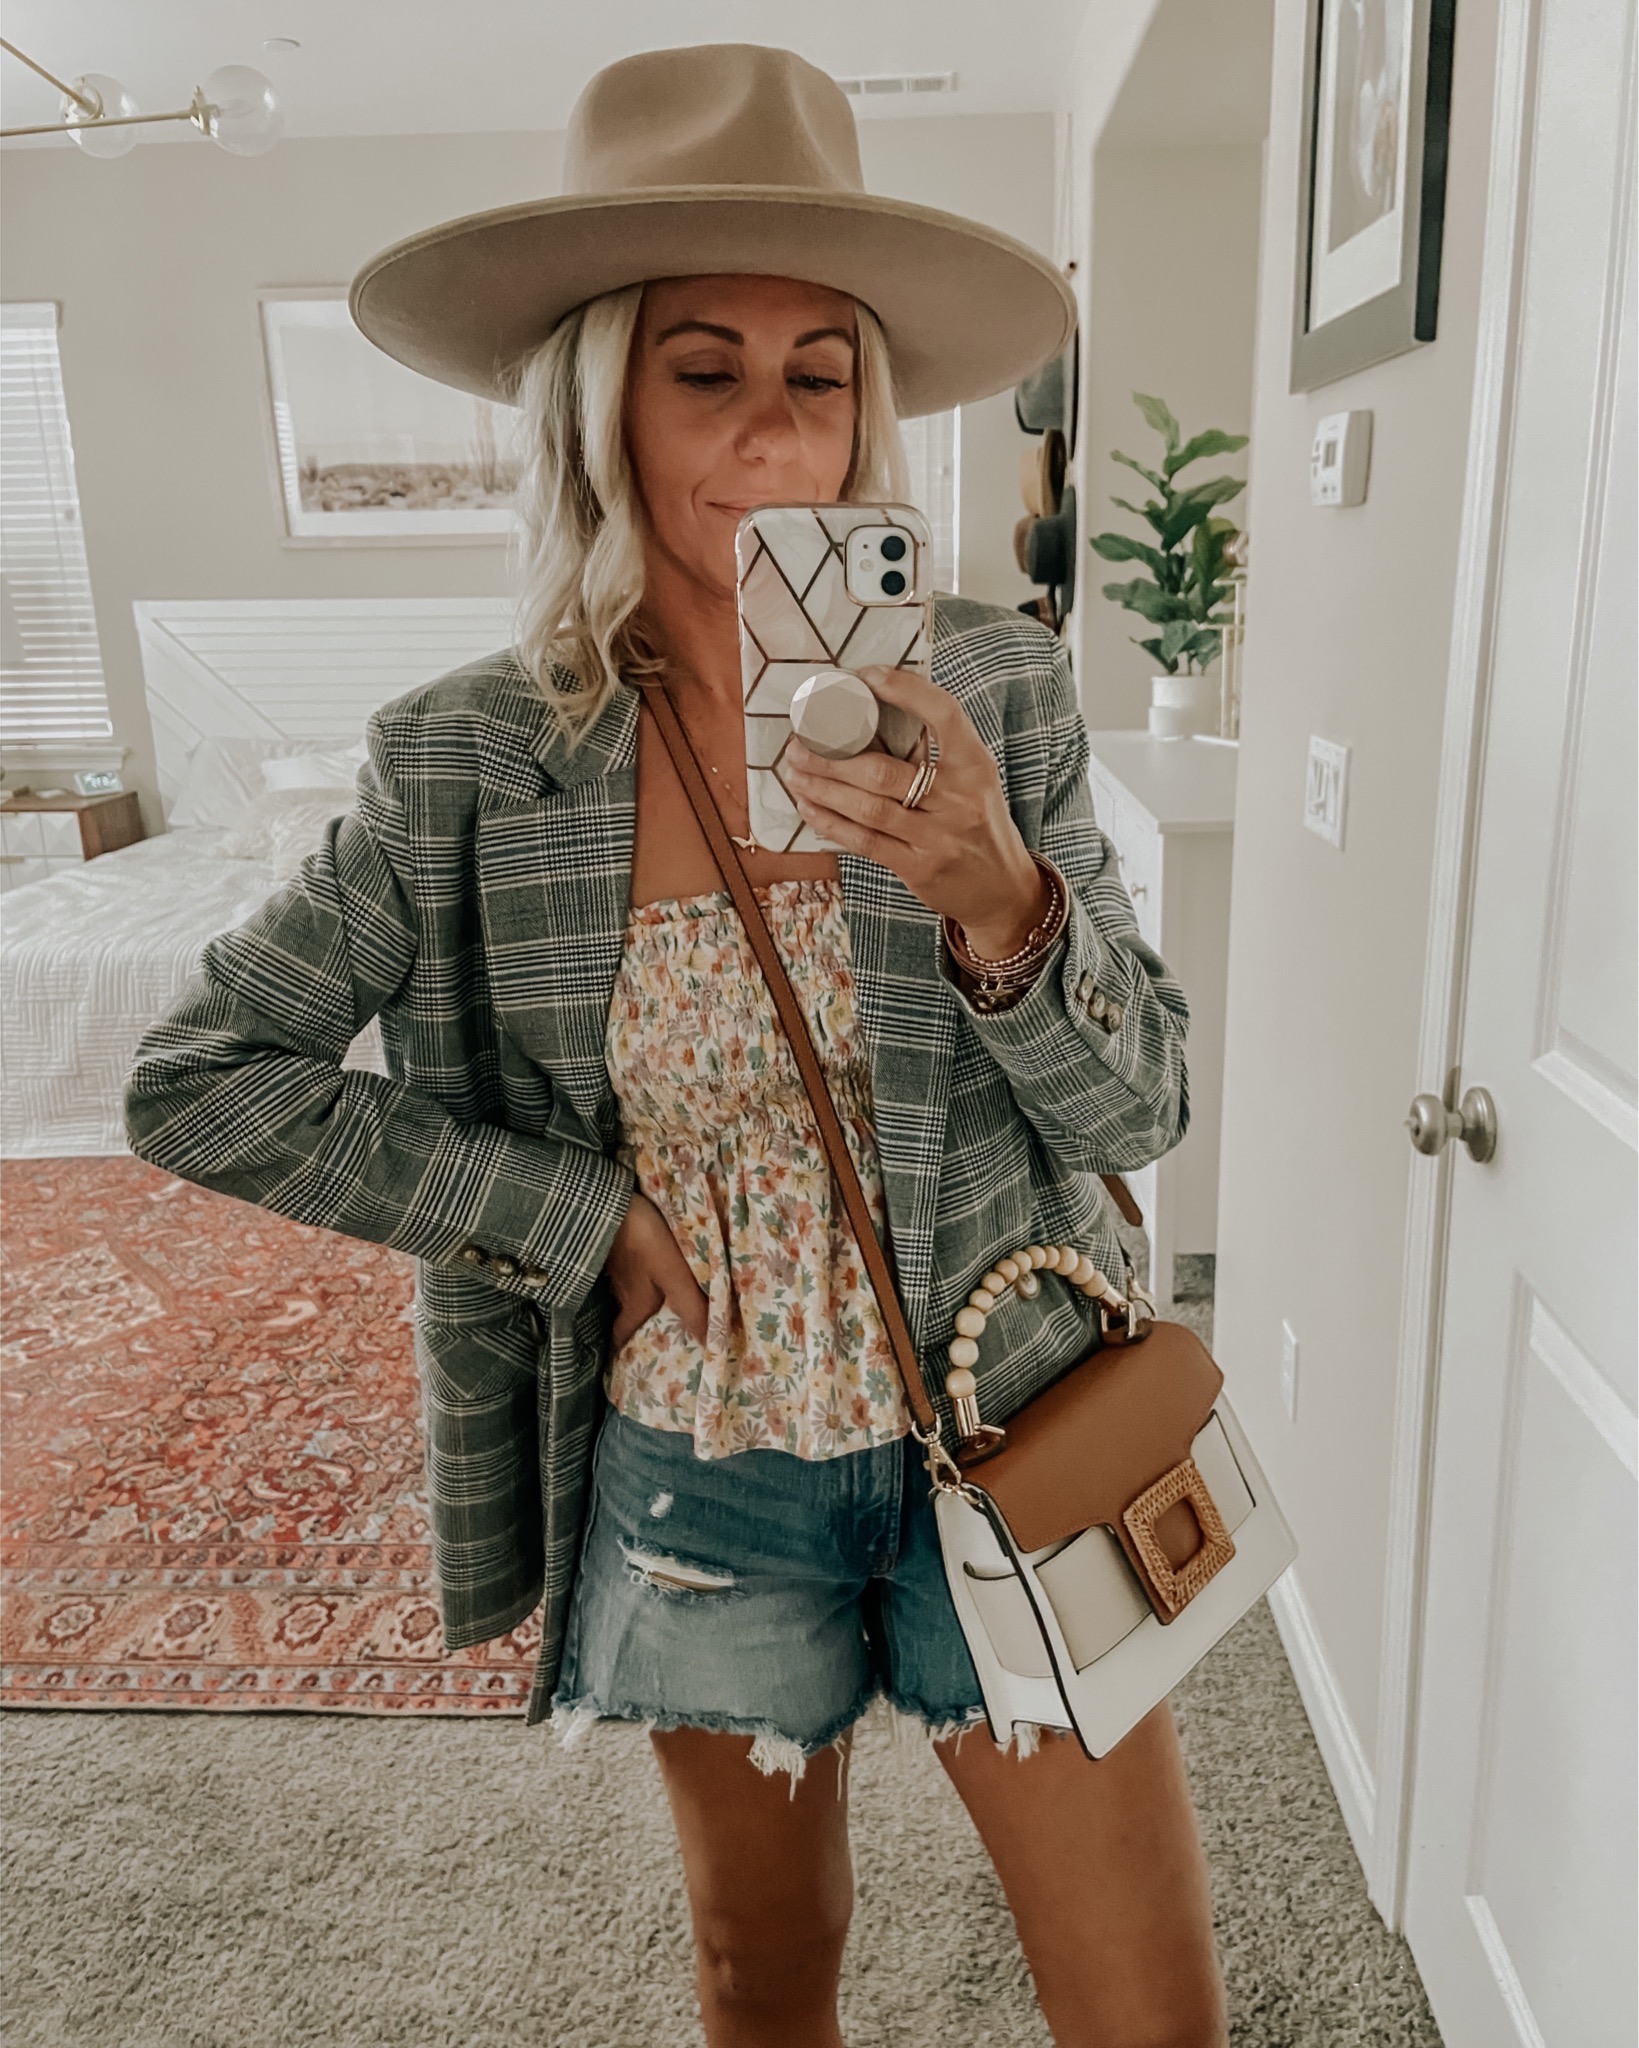 5 WAYS TO STYLE DENIM SHORTS- Jaclyn De Leon Style- Sharing a few different ways to style denim shorts from casual + cool to dressed up for date night